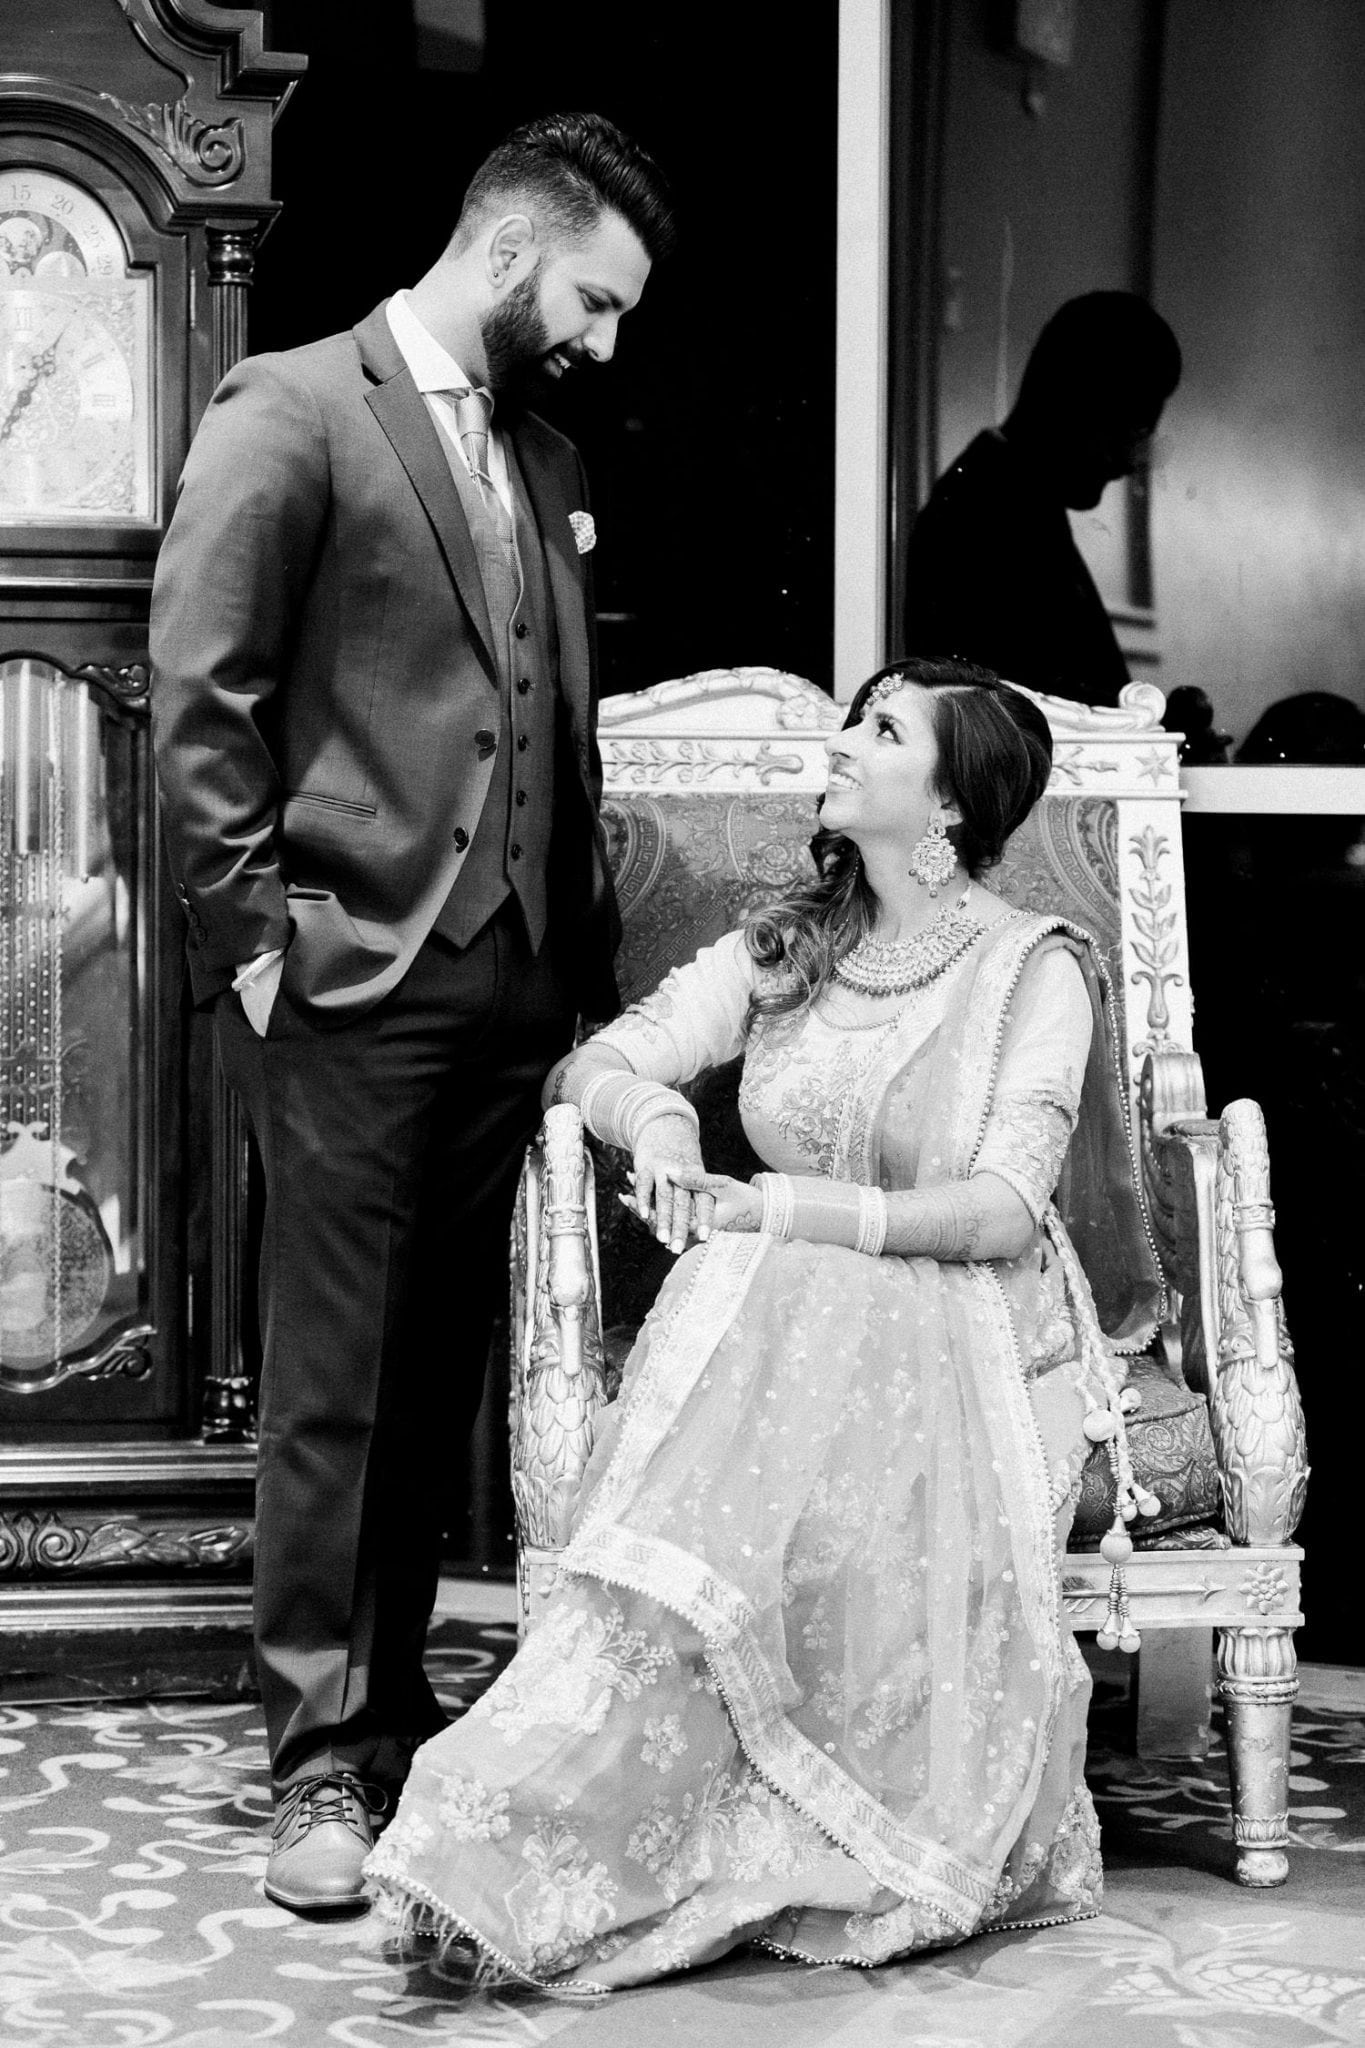 Chura and jaggo in Crown Palace Banquet Hall | Vancouver Indian wedding photographer